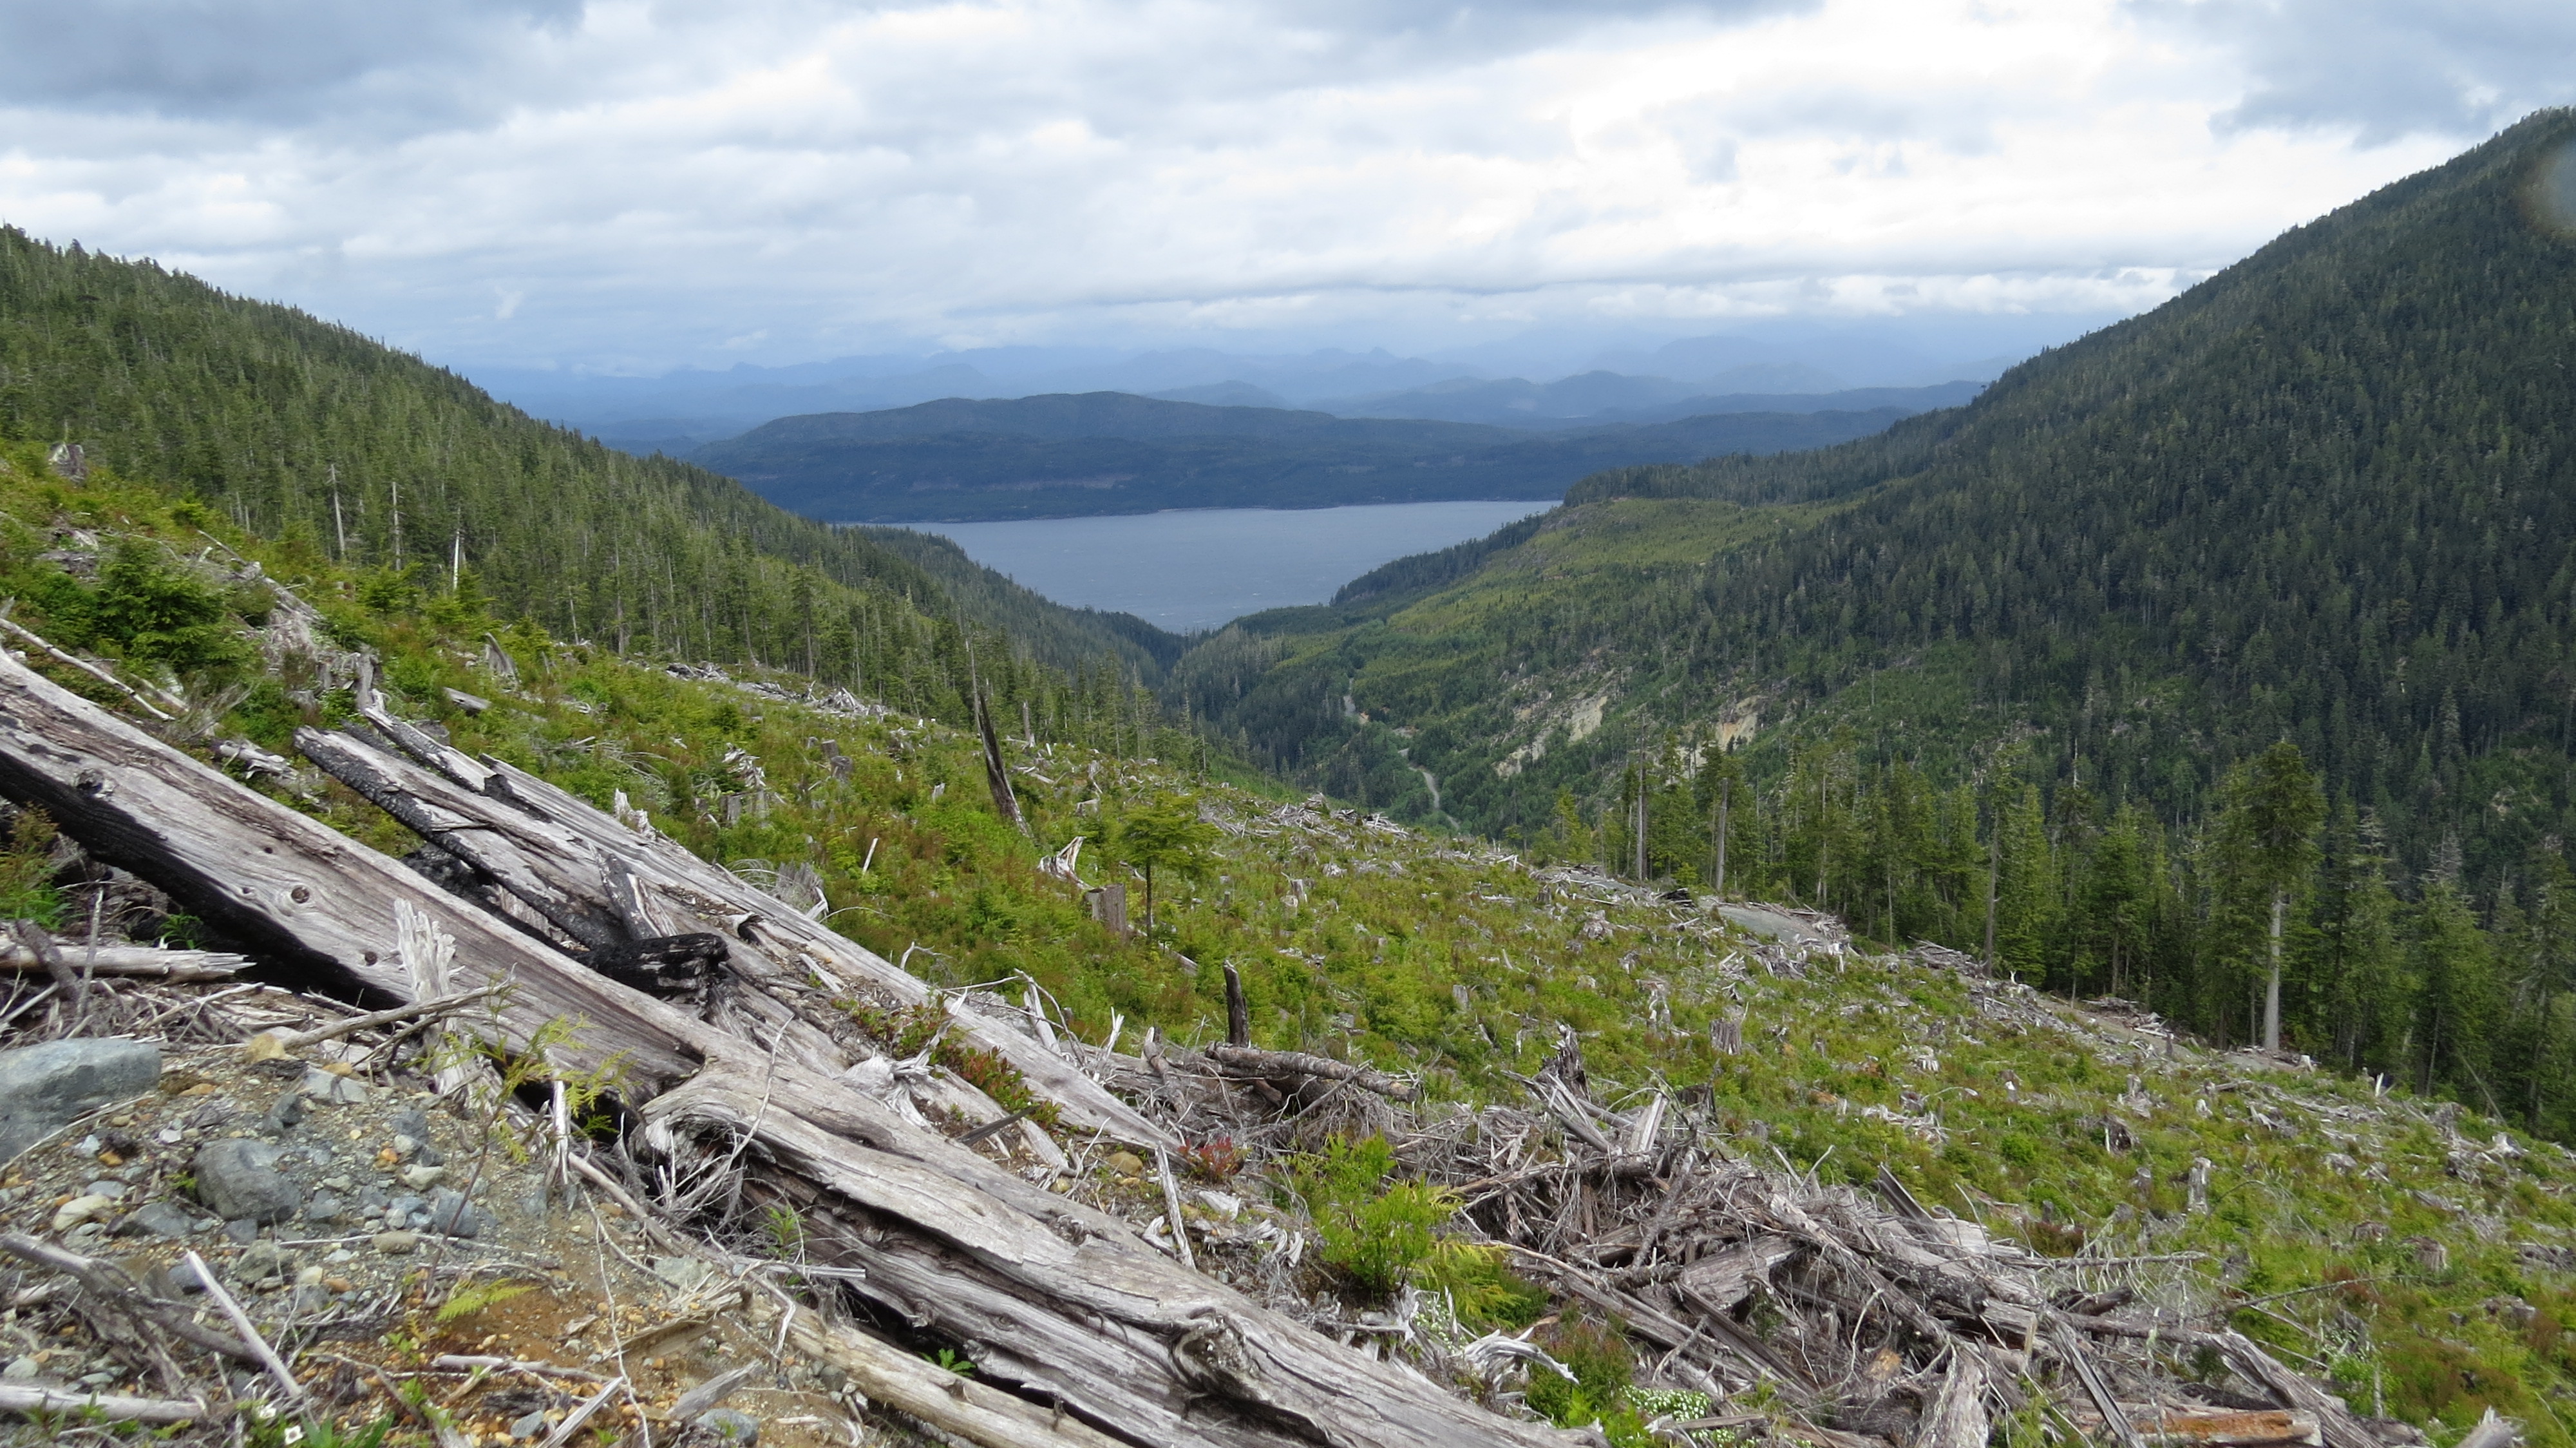 Previous clearcut logging in Schmidt Creek, with Johnstone Strait and Cracroft Island in the background